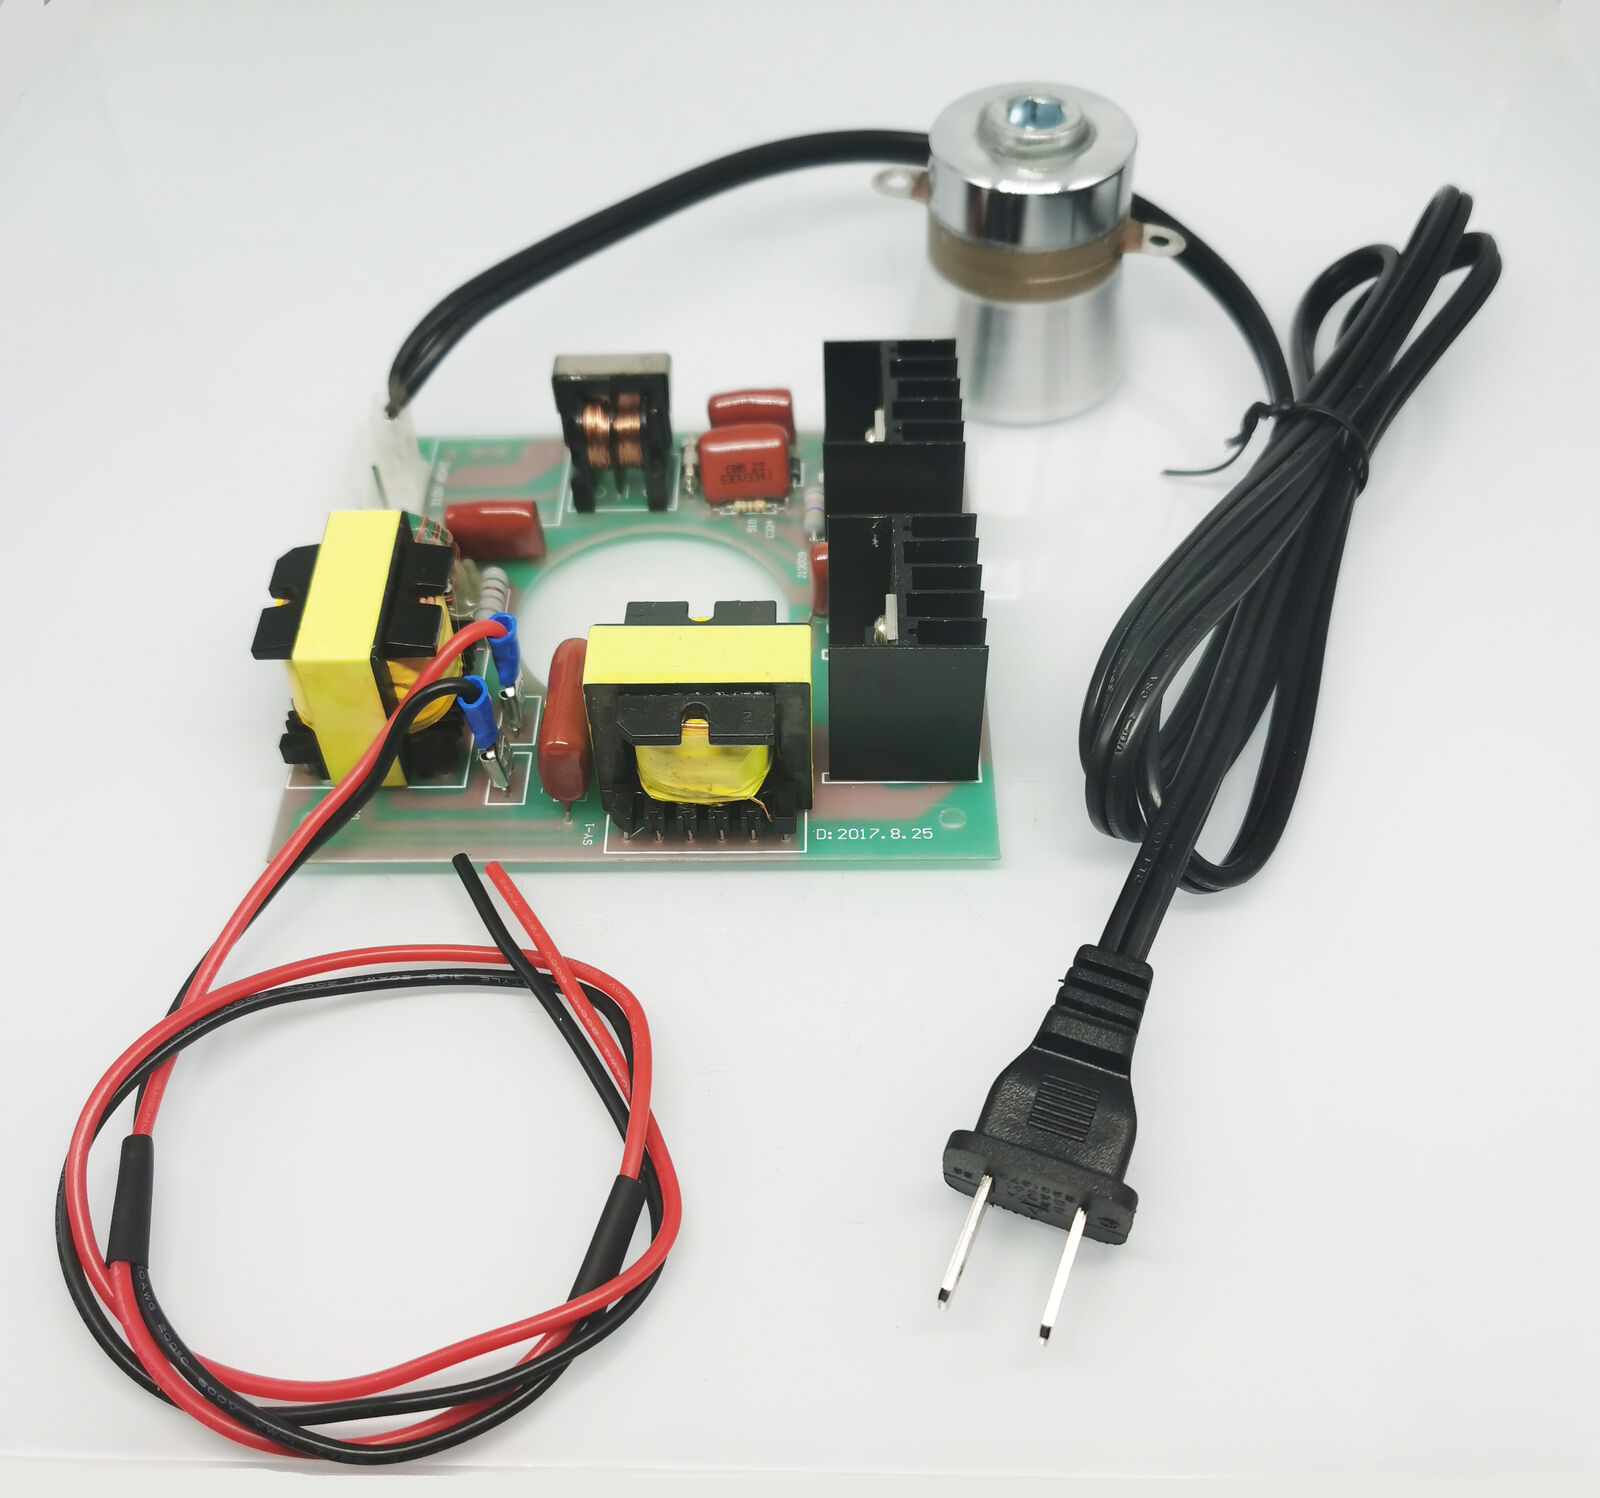 US Stock 110VAC 60W 40KHz Ultrasonic Cleaning Transducer Cleaner & Driver Board